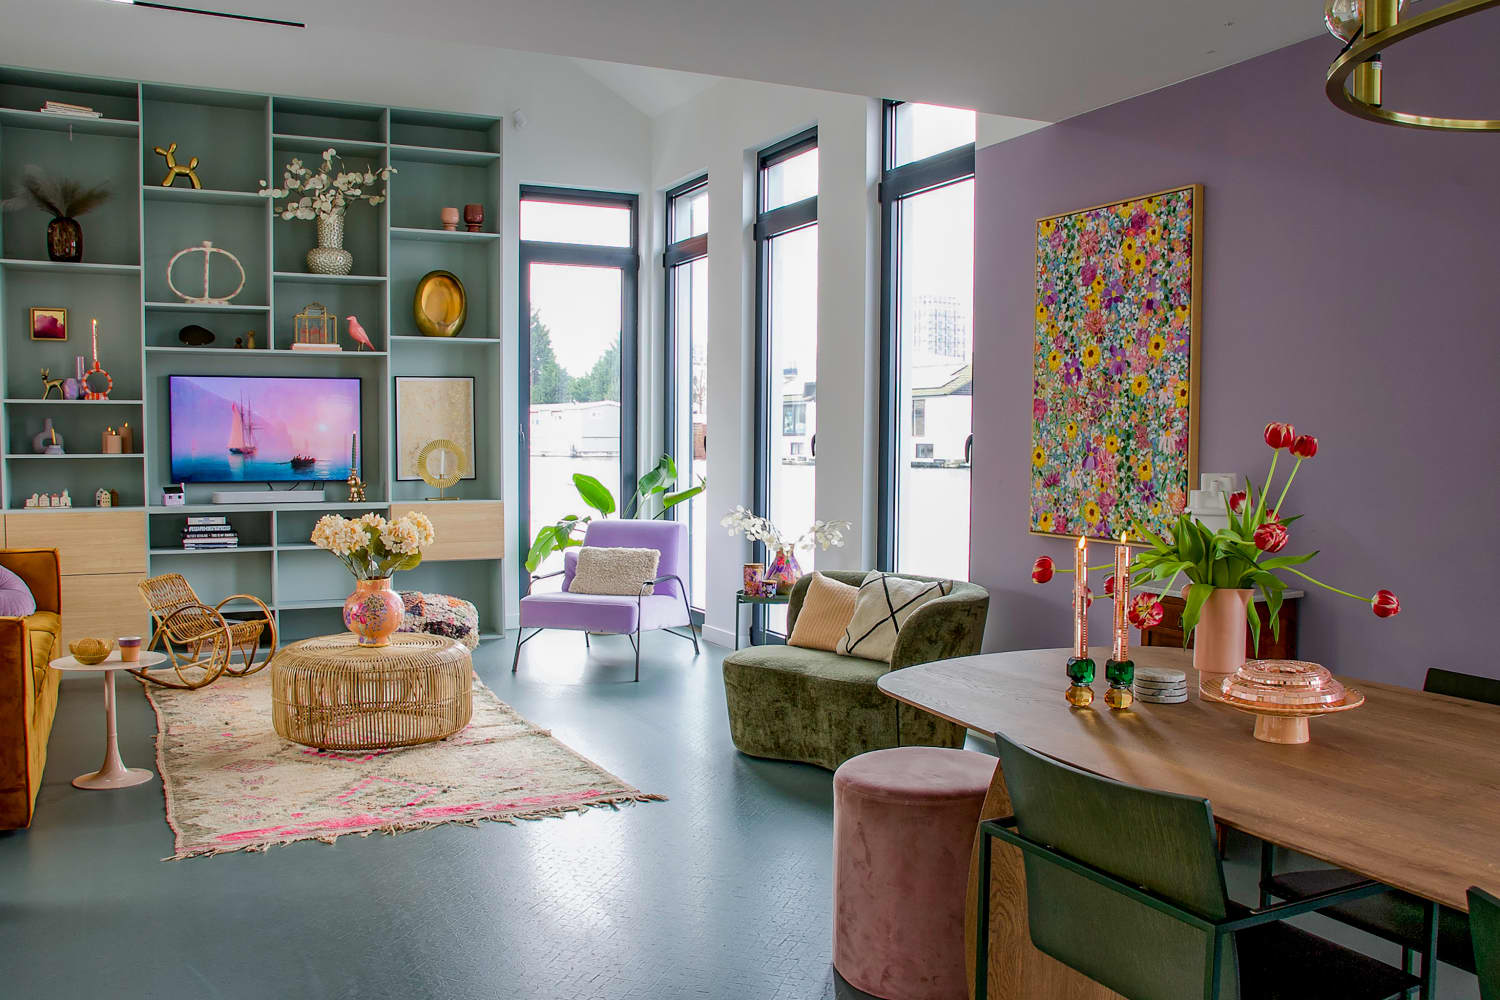 Look Inside This Gorgeous, Colorful Amsterdam Houseboat